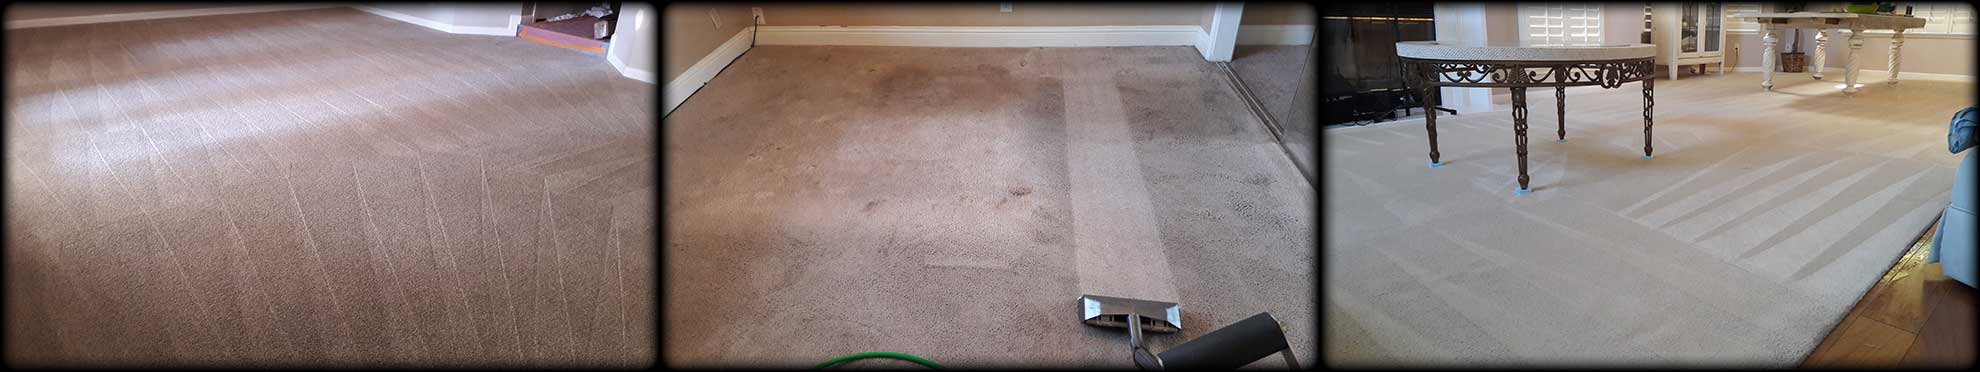 assets/images/causes/slider/main-carpet-cleaning-services-banner